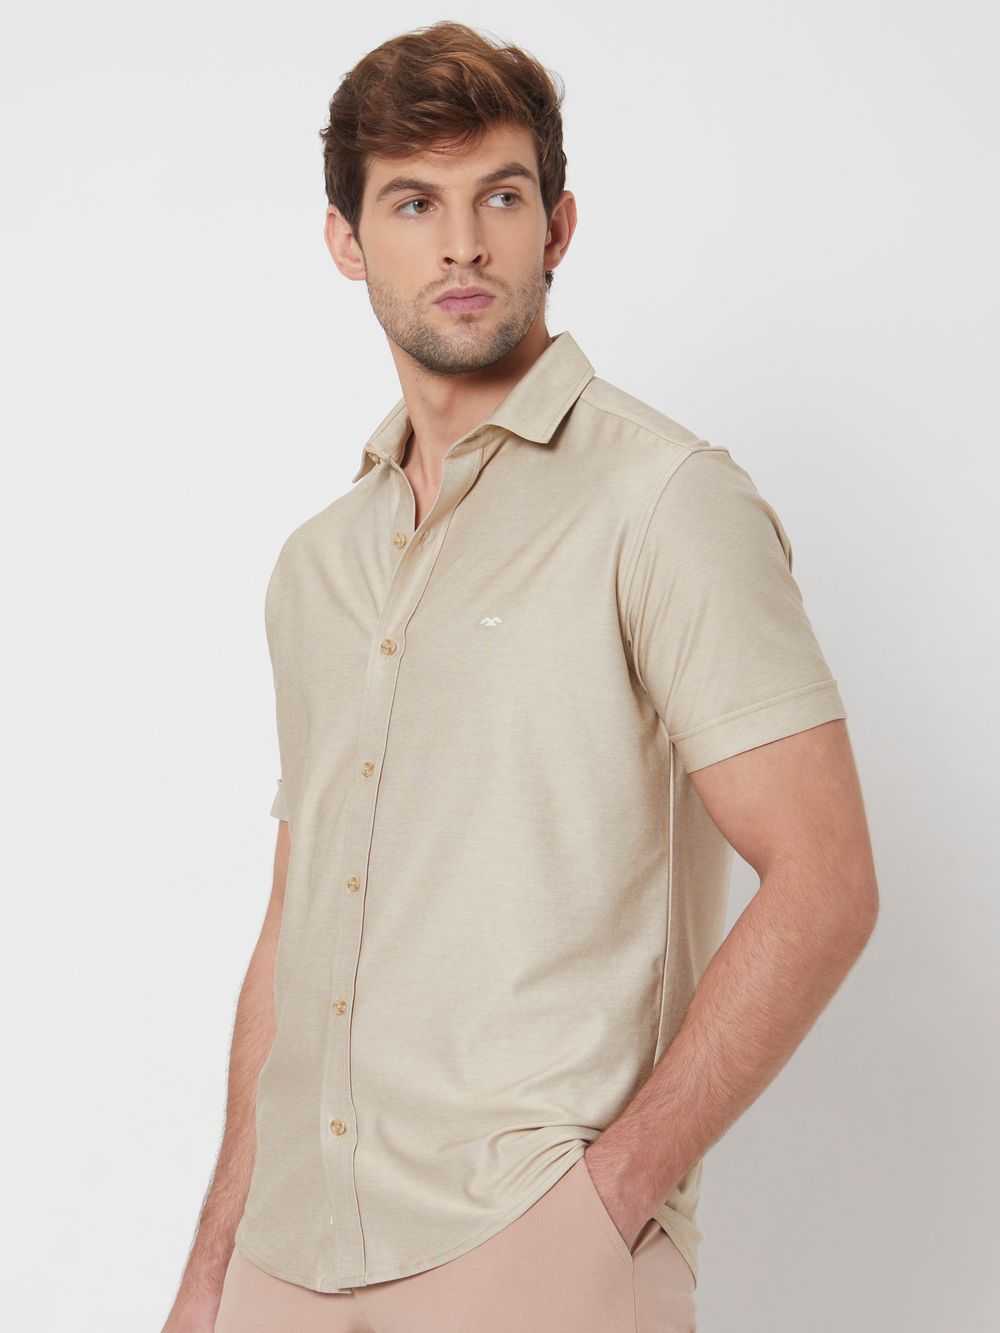 Beige Knitted Plainslim Fit Casual Shirt